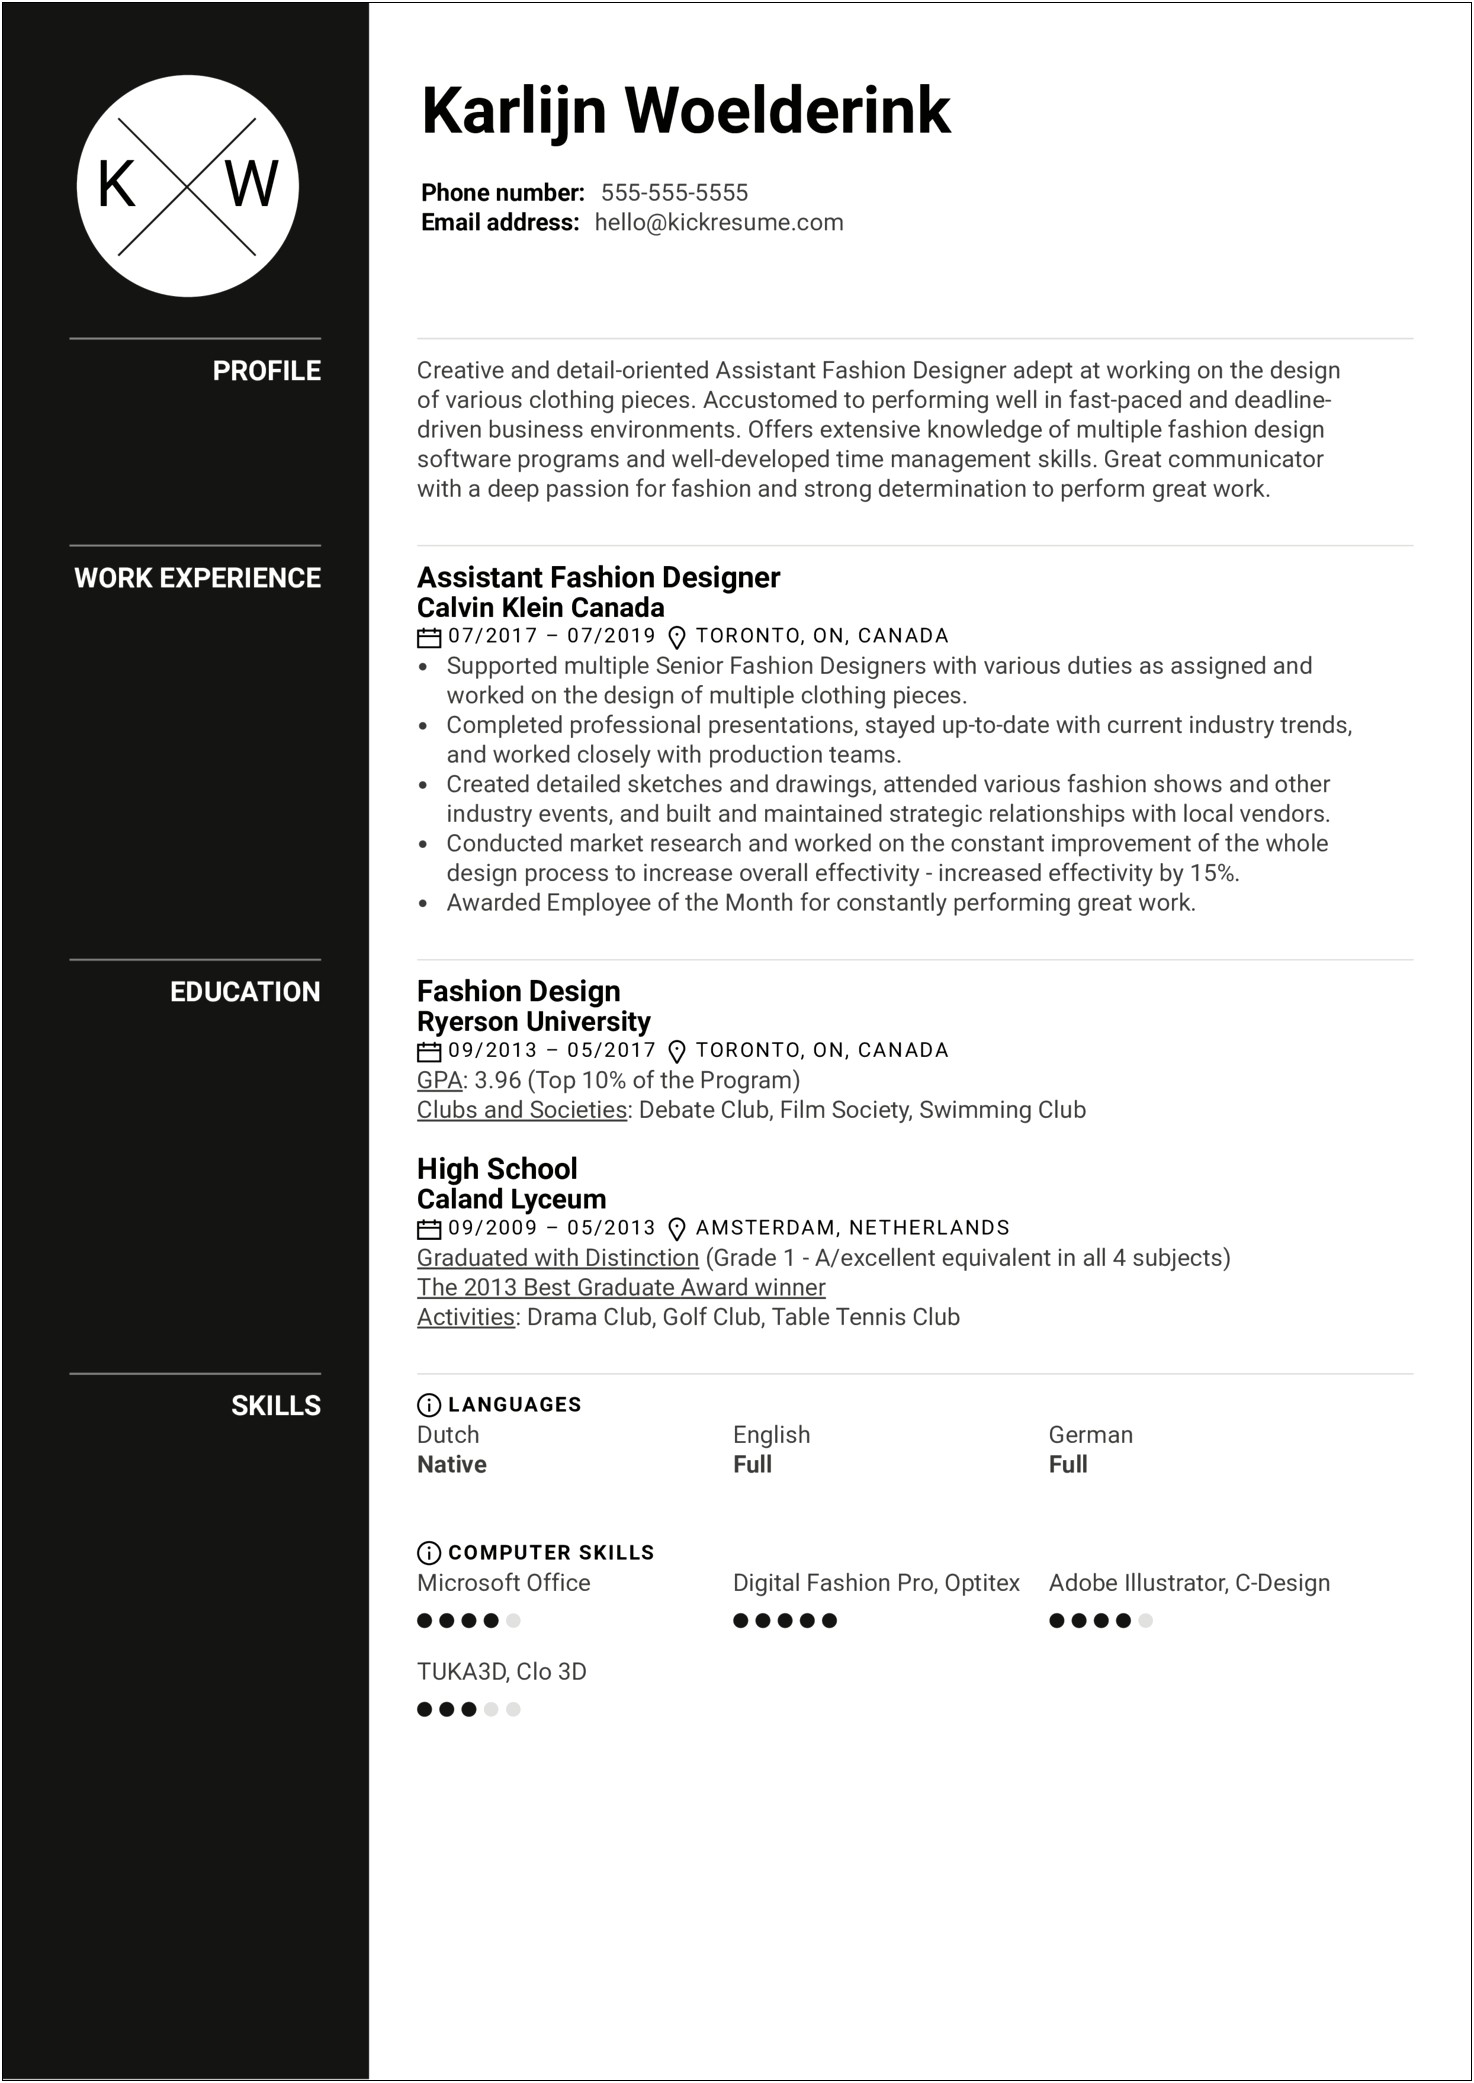 Assistant Golf Professional Resume Example